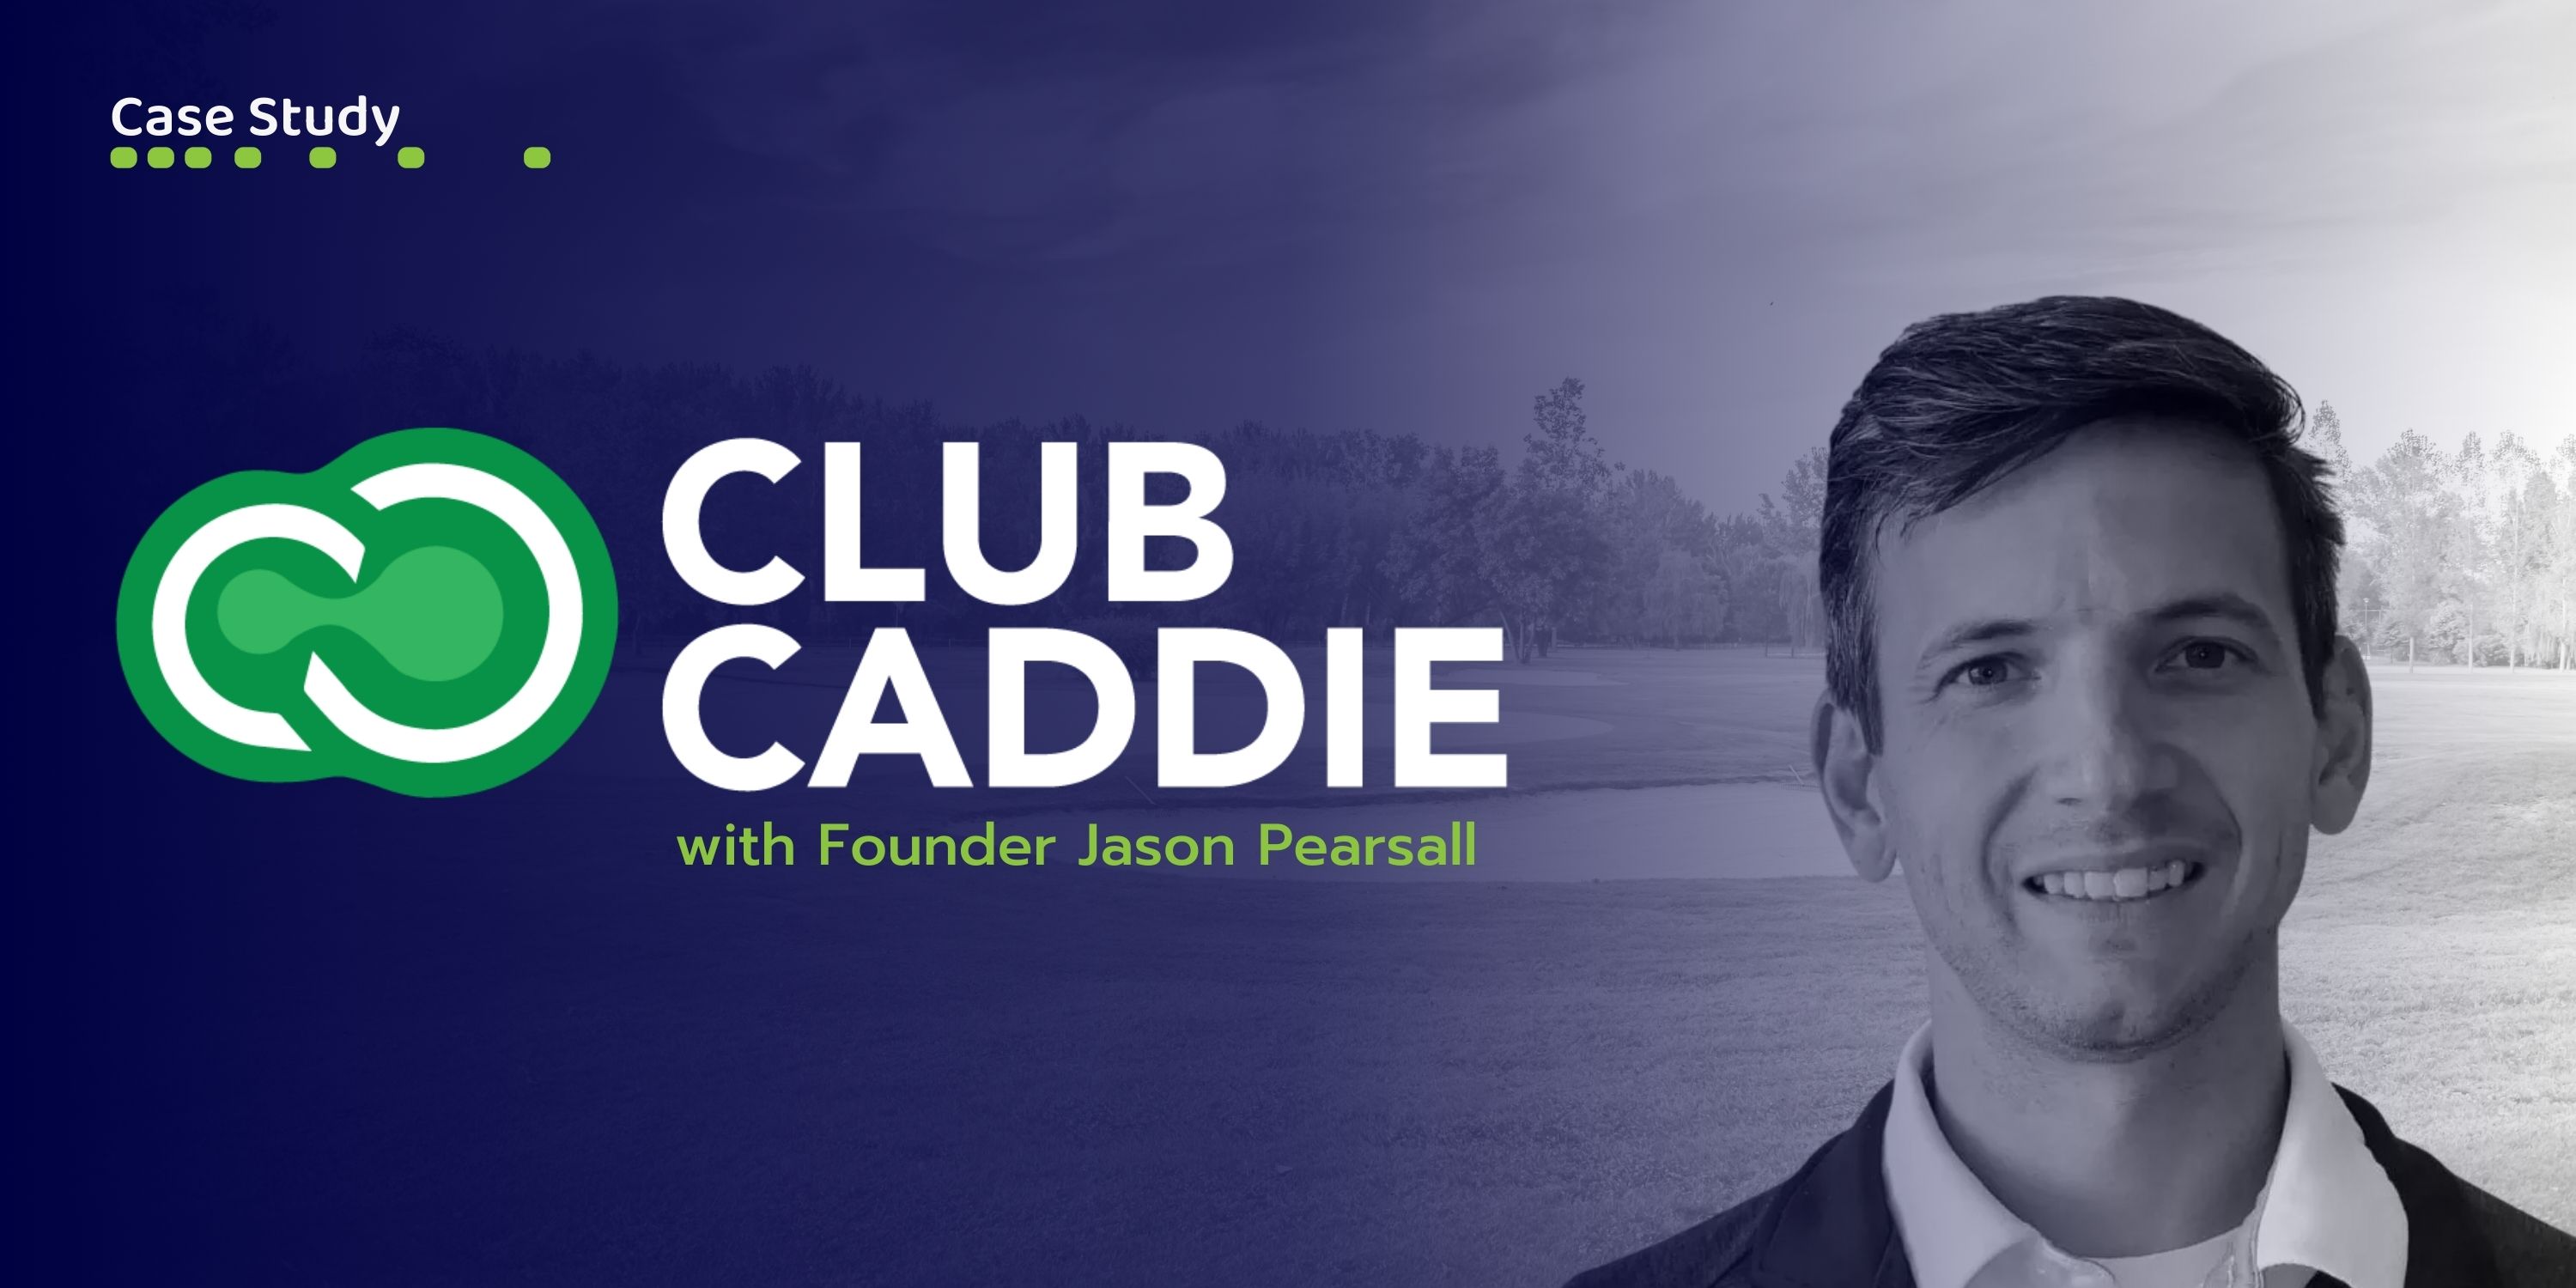 Case Study: Club Caddie with Founder Jason Pearsall